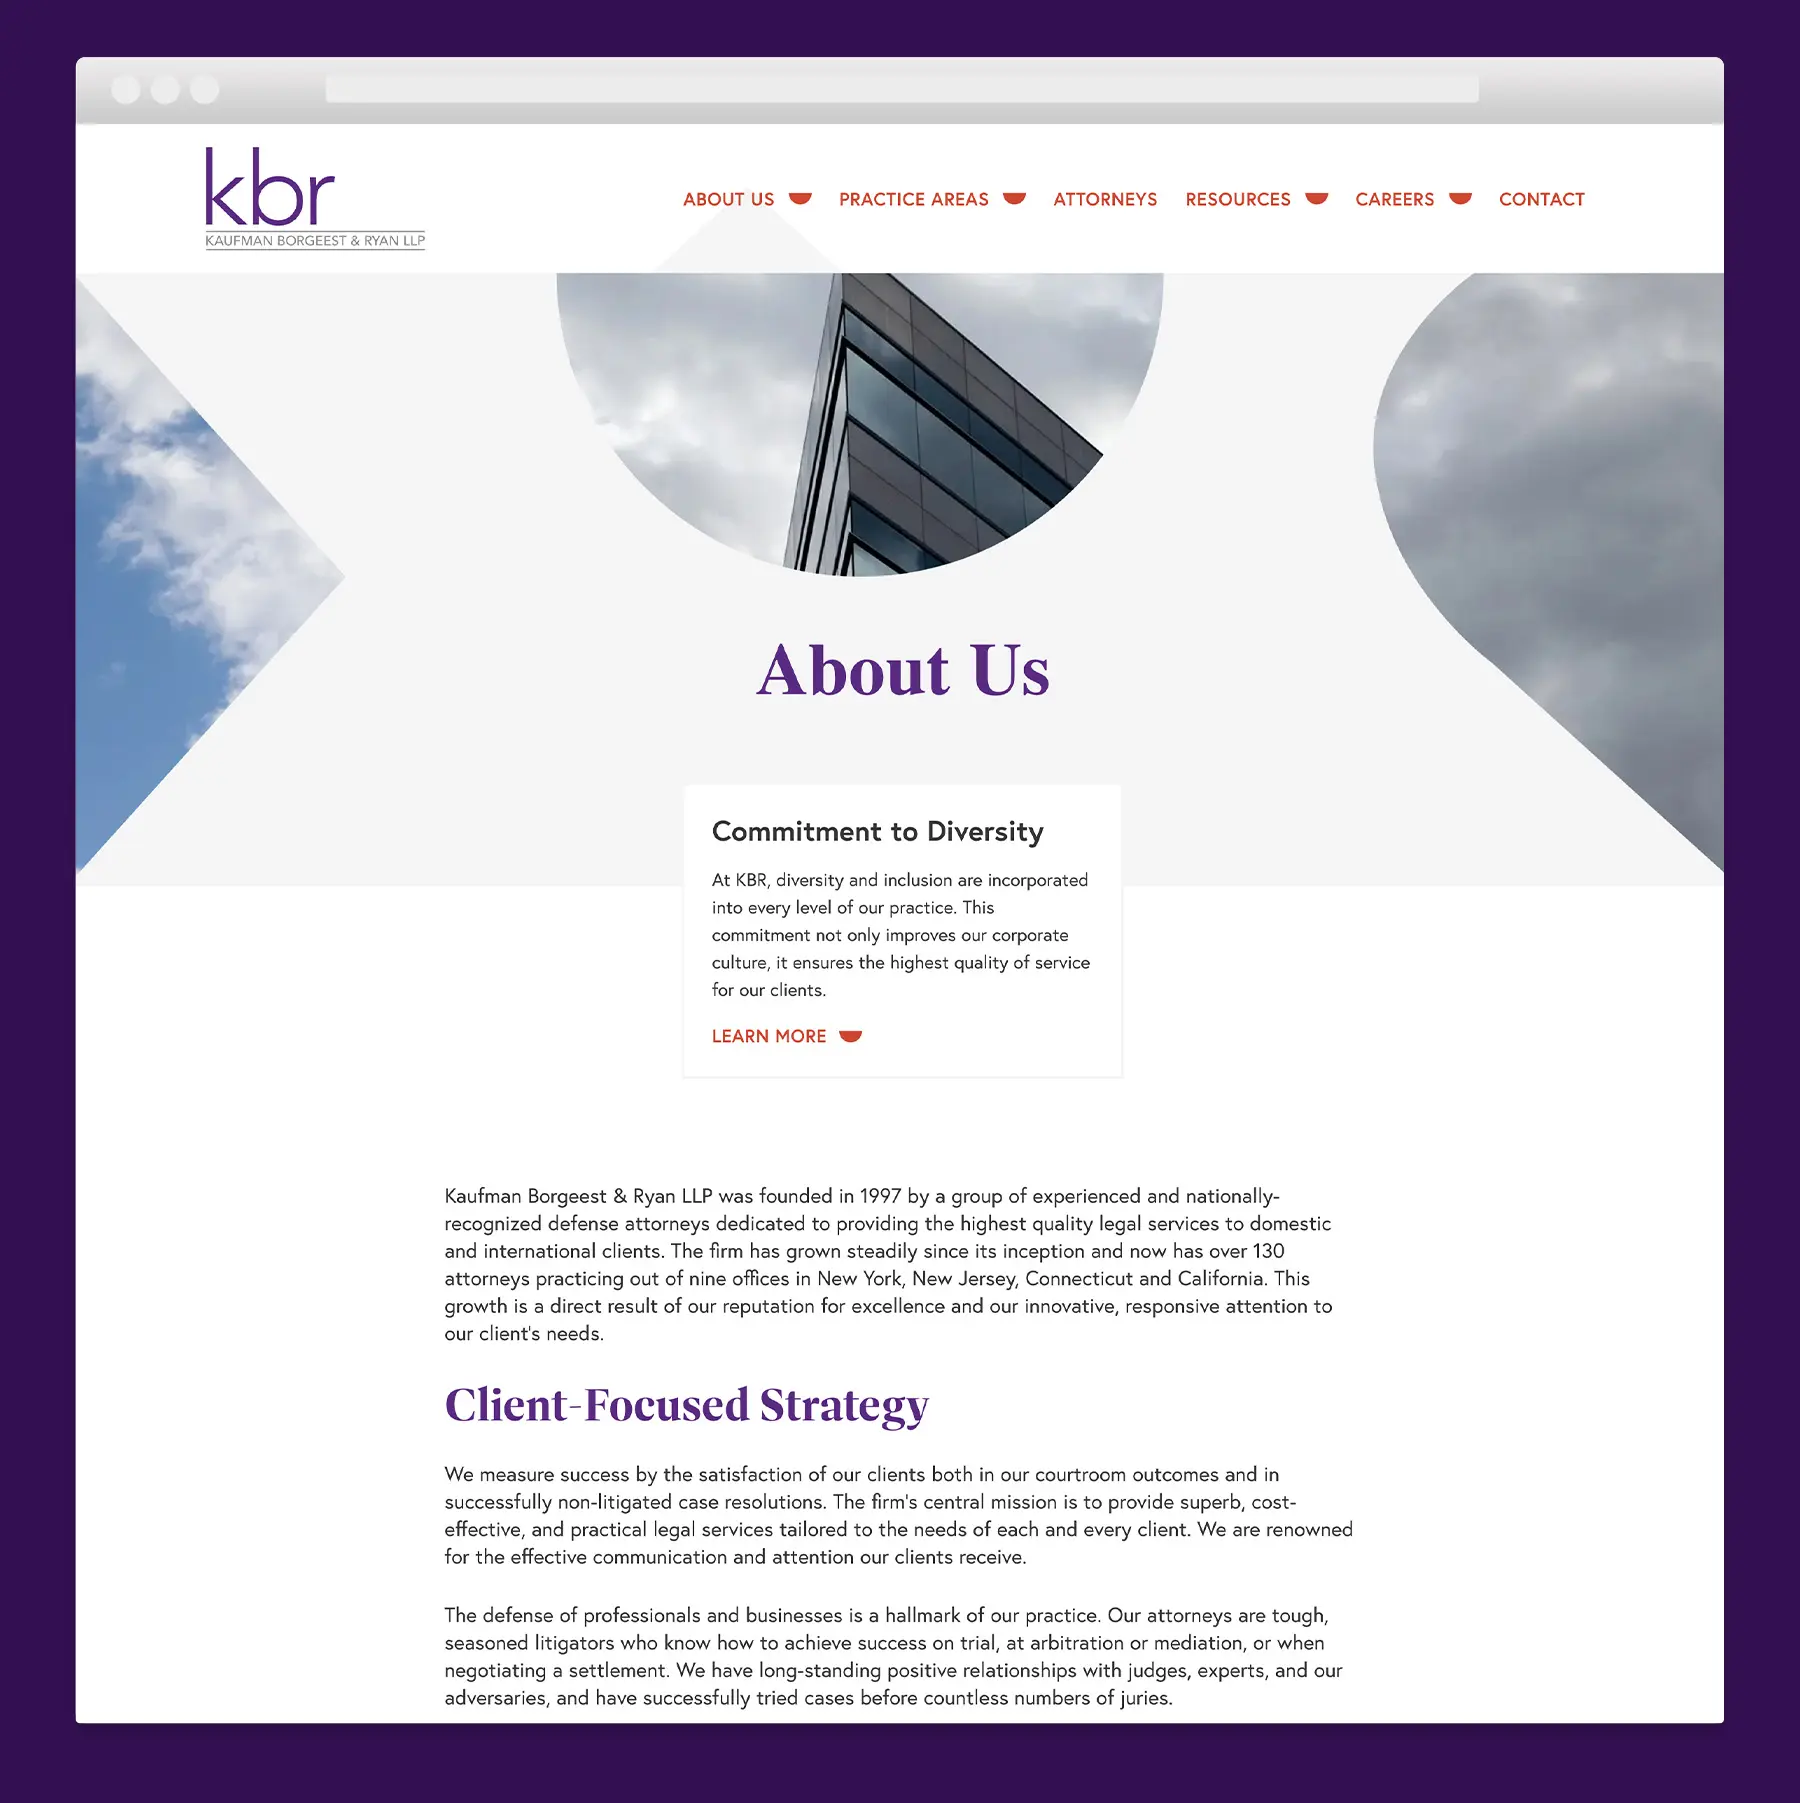 About us page design with abstract shapes masking an image of a building with blue sky and clouds behind it